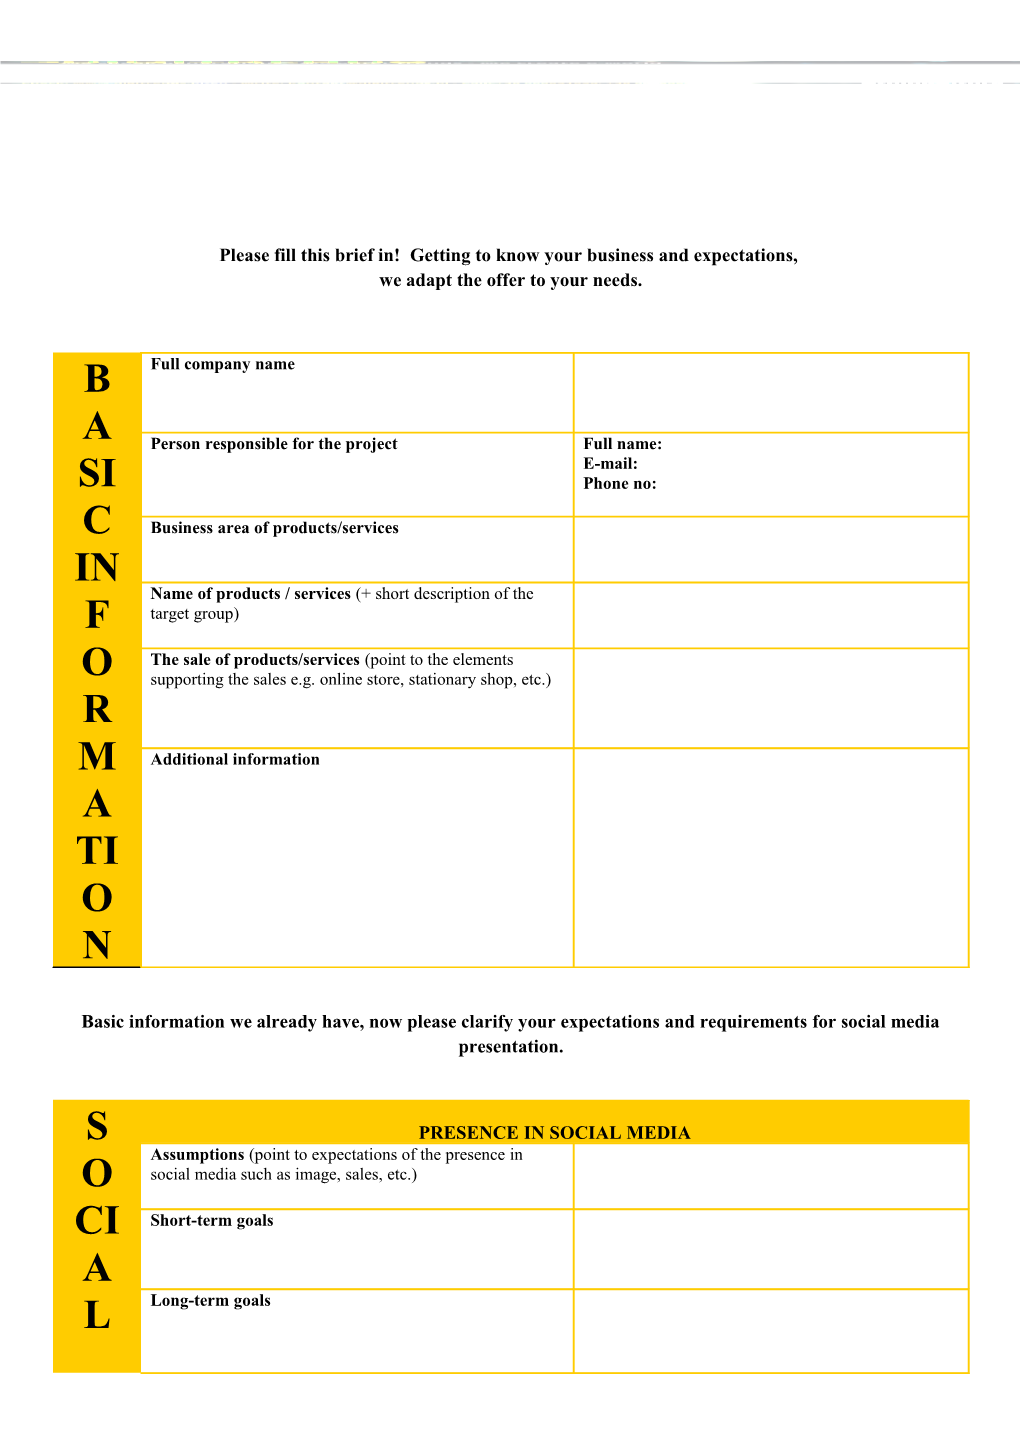 Please Fill This Brief In! Getting to Know Your Business and Expectations, We Adapt The